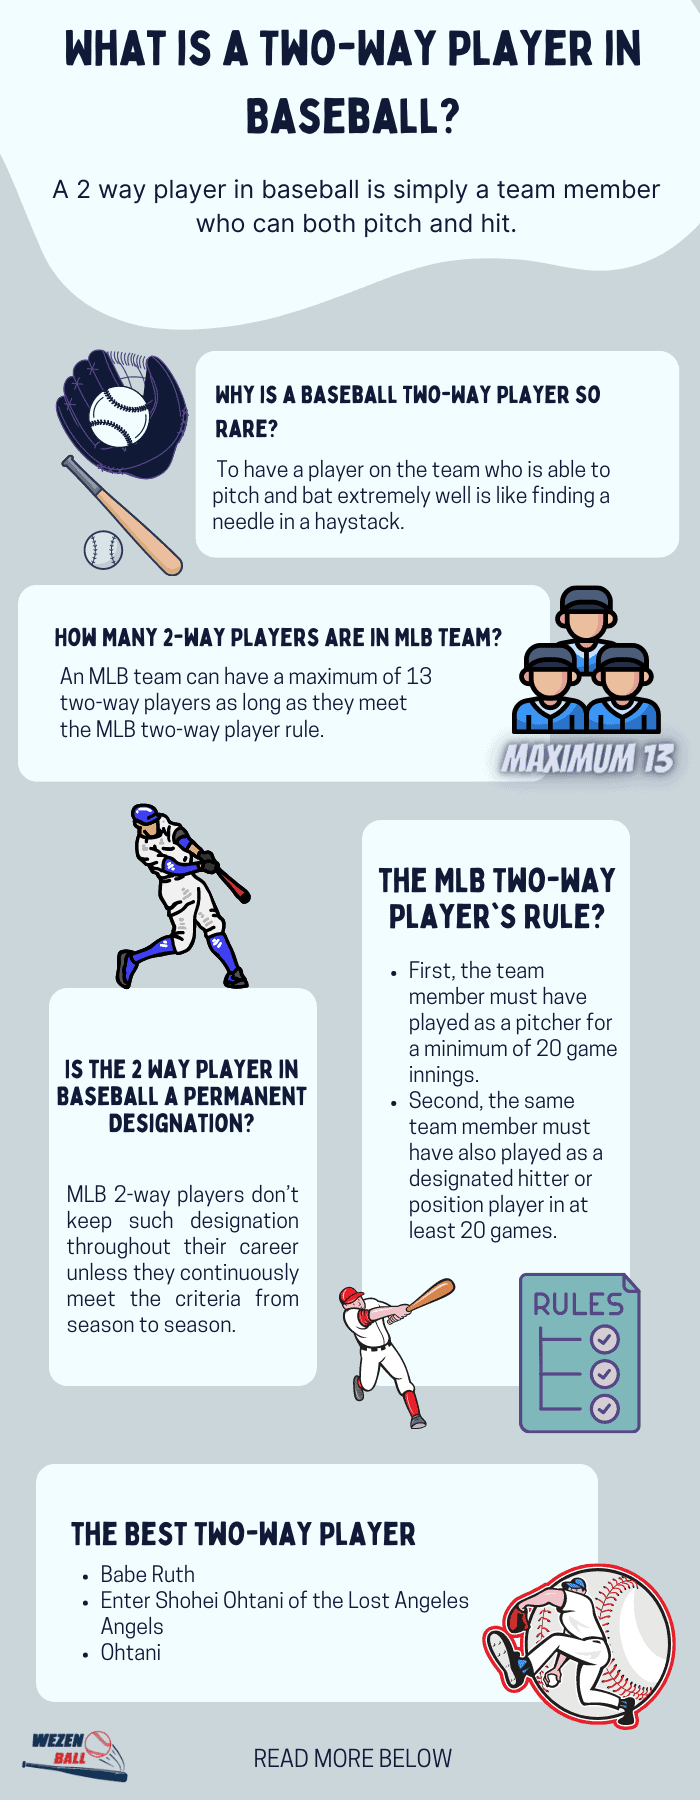 2-way-players-in-mlb